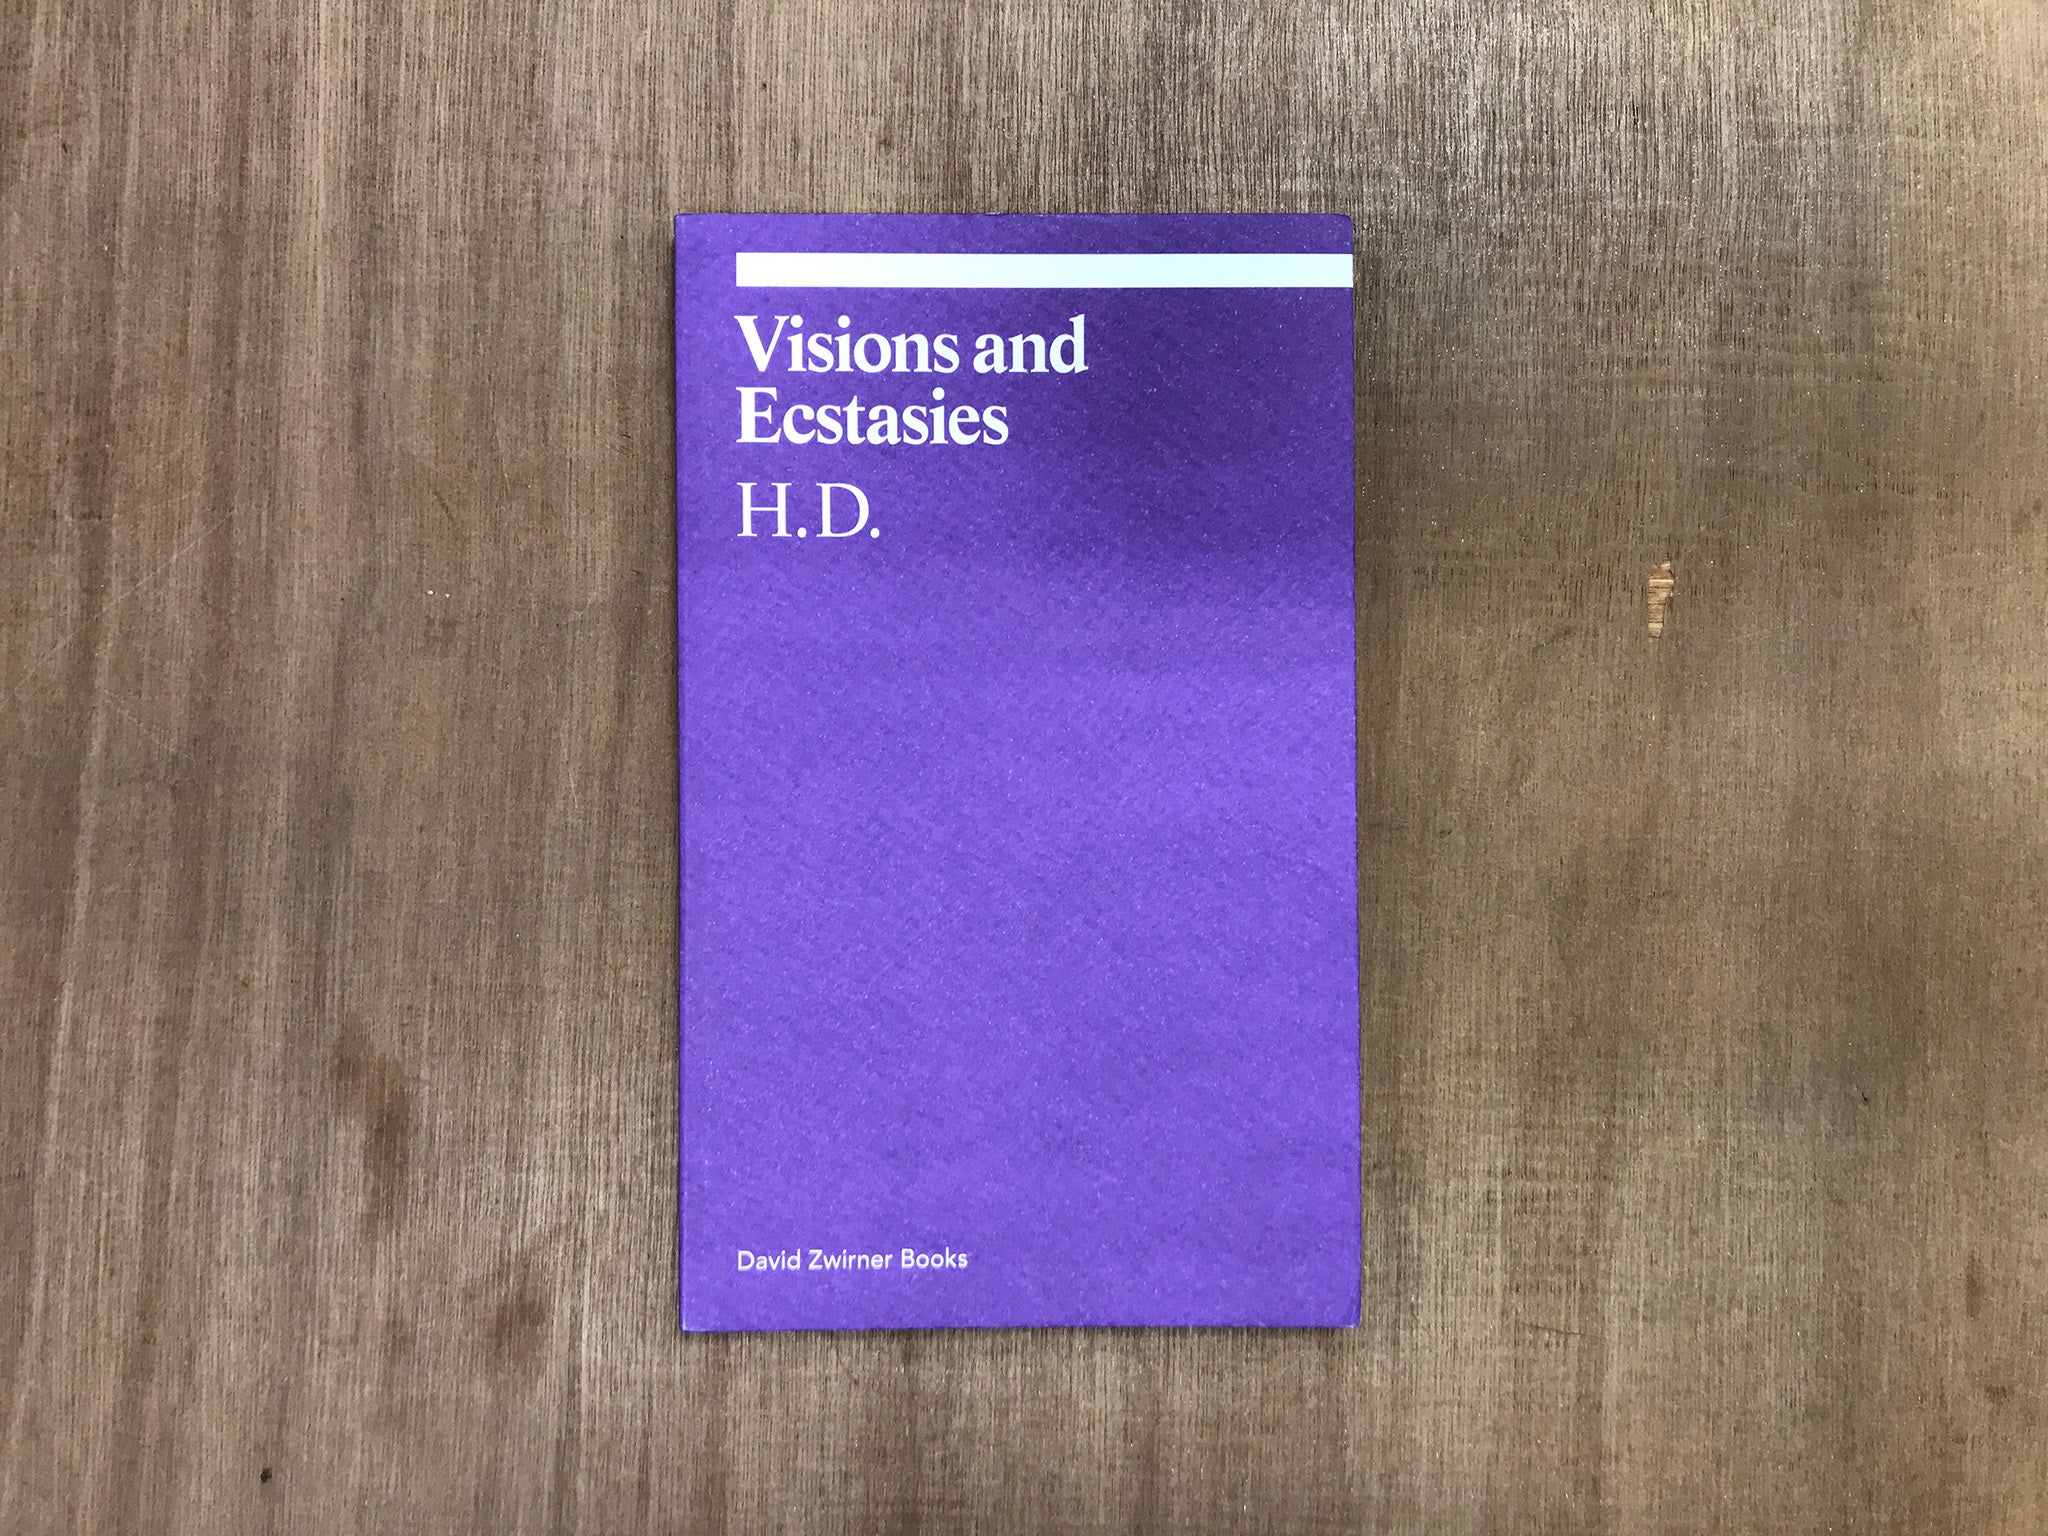 VISIONS AND ECSTASIES by H.D.